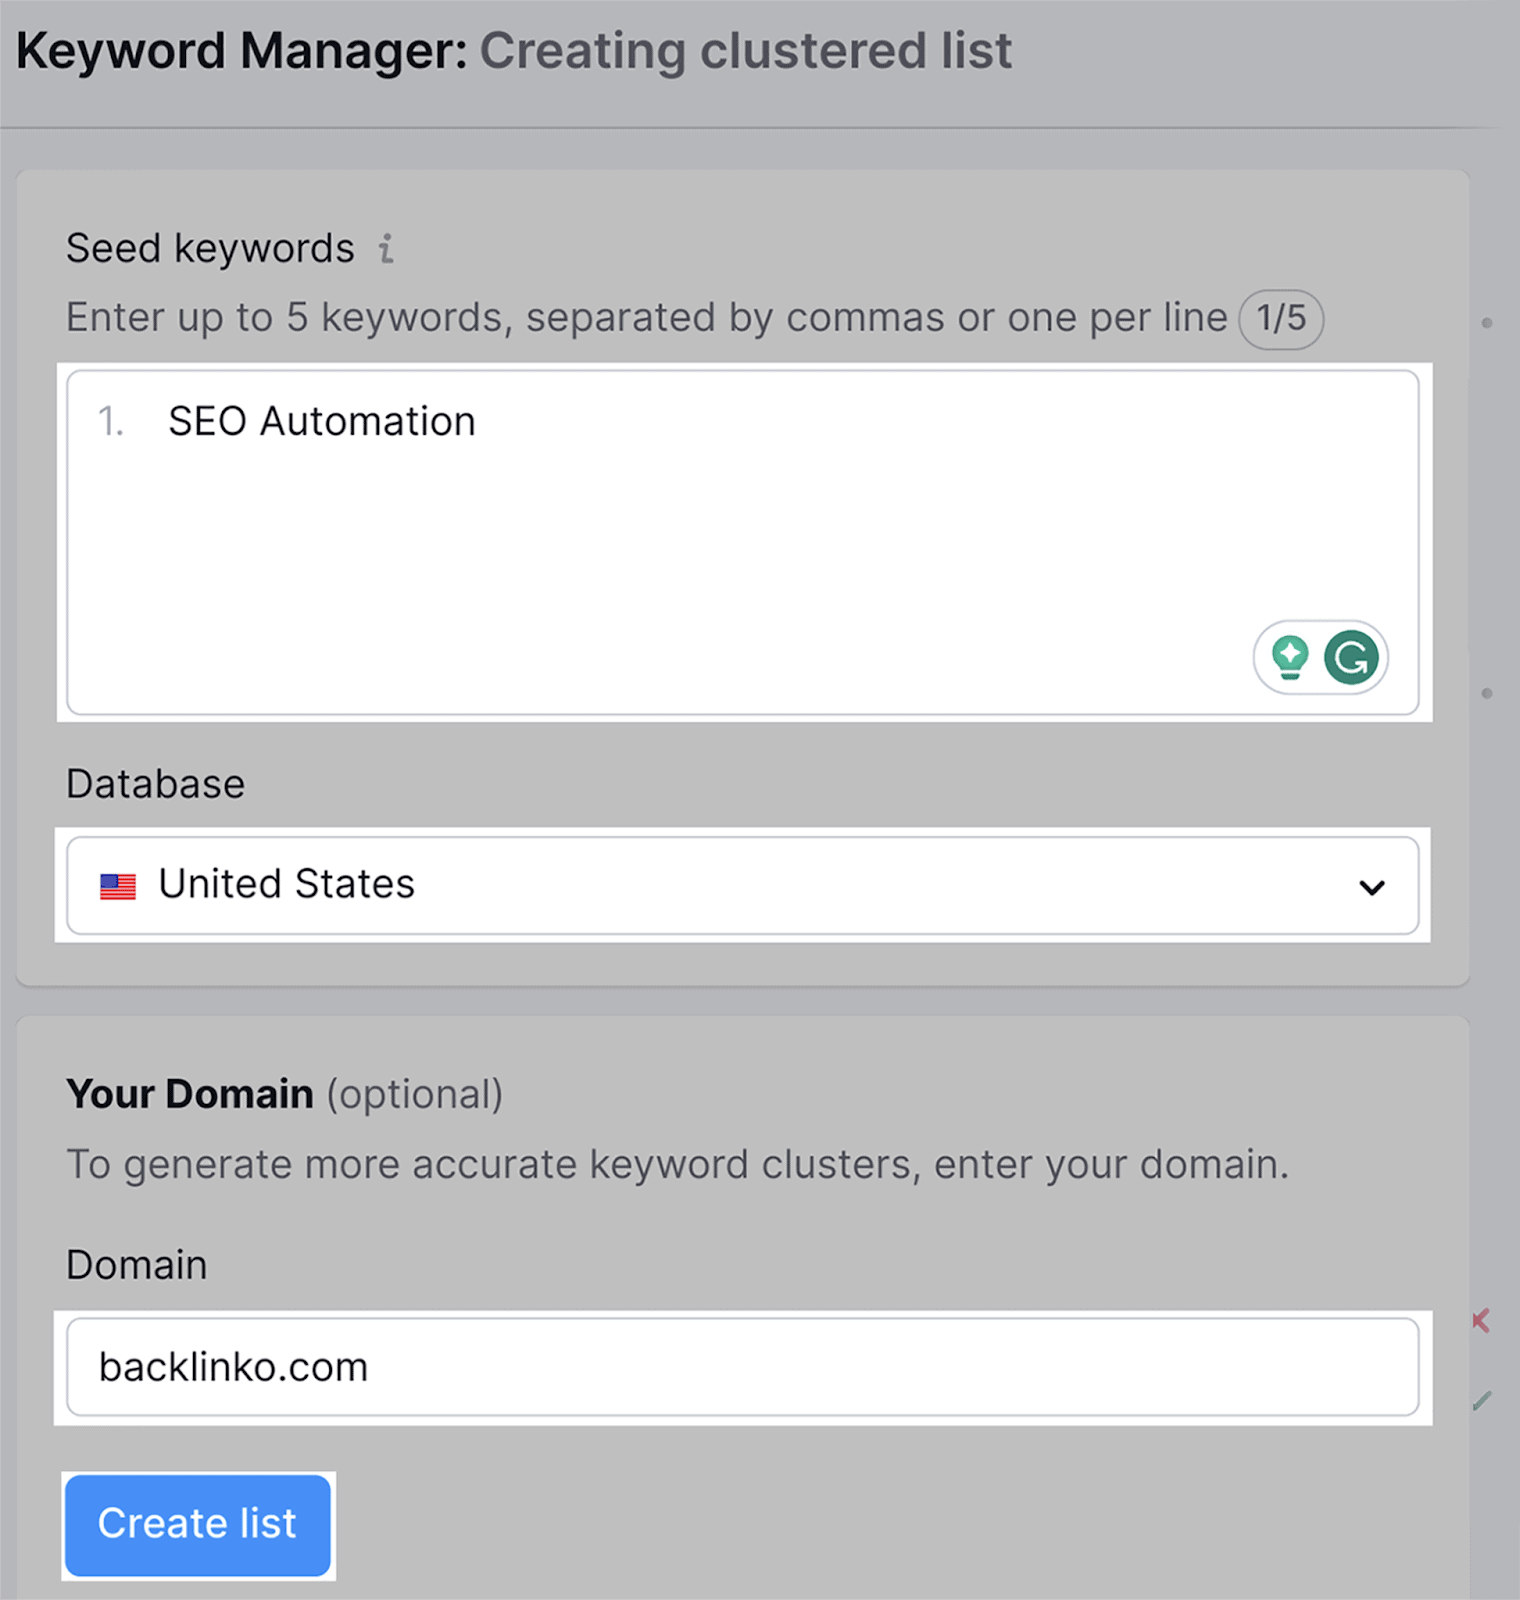 Enter seed keyword, select database then add your domain